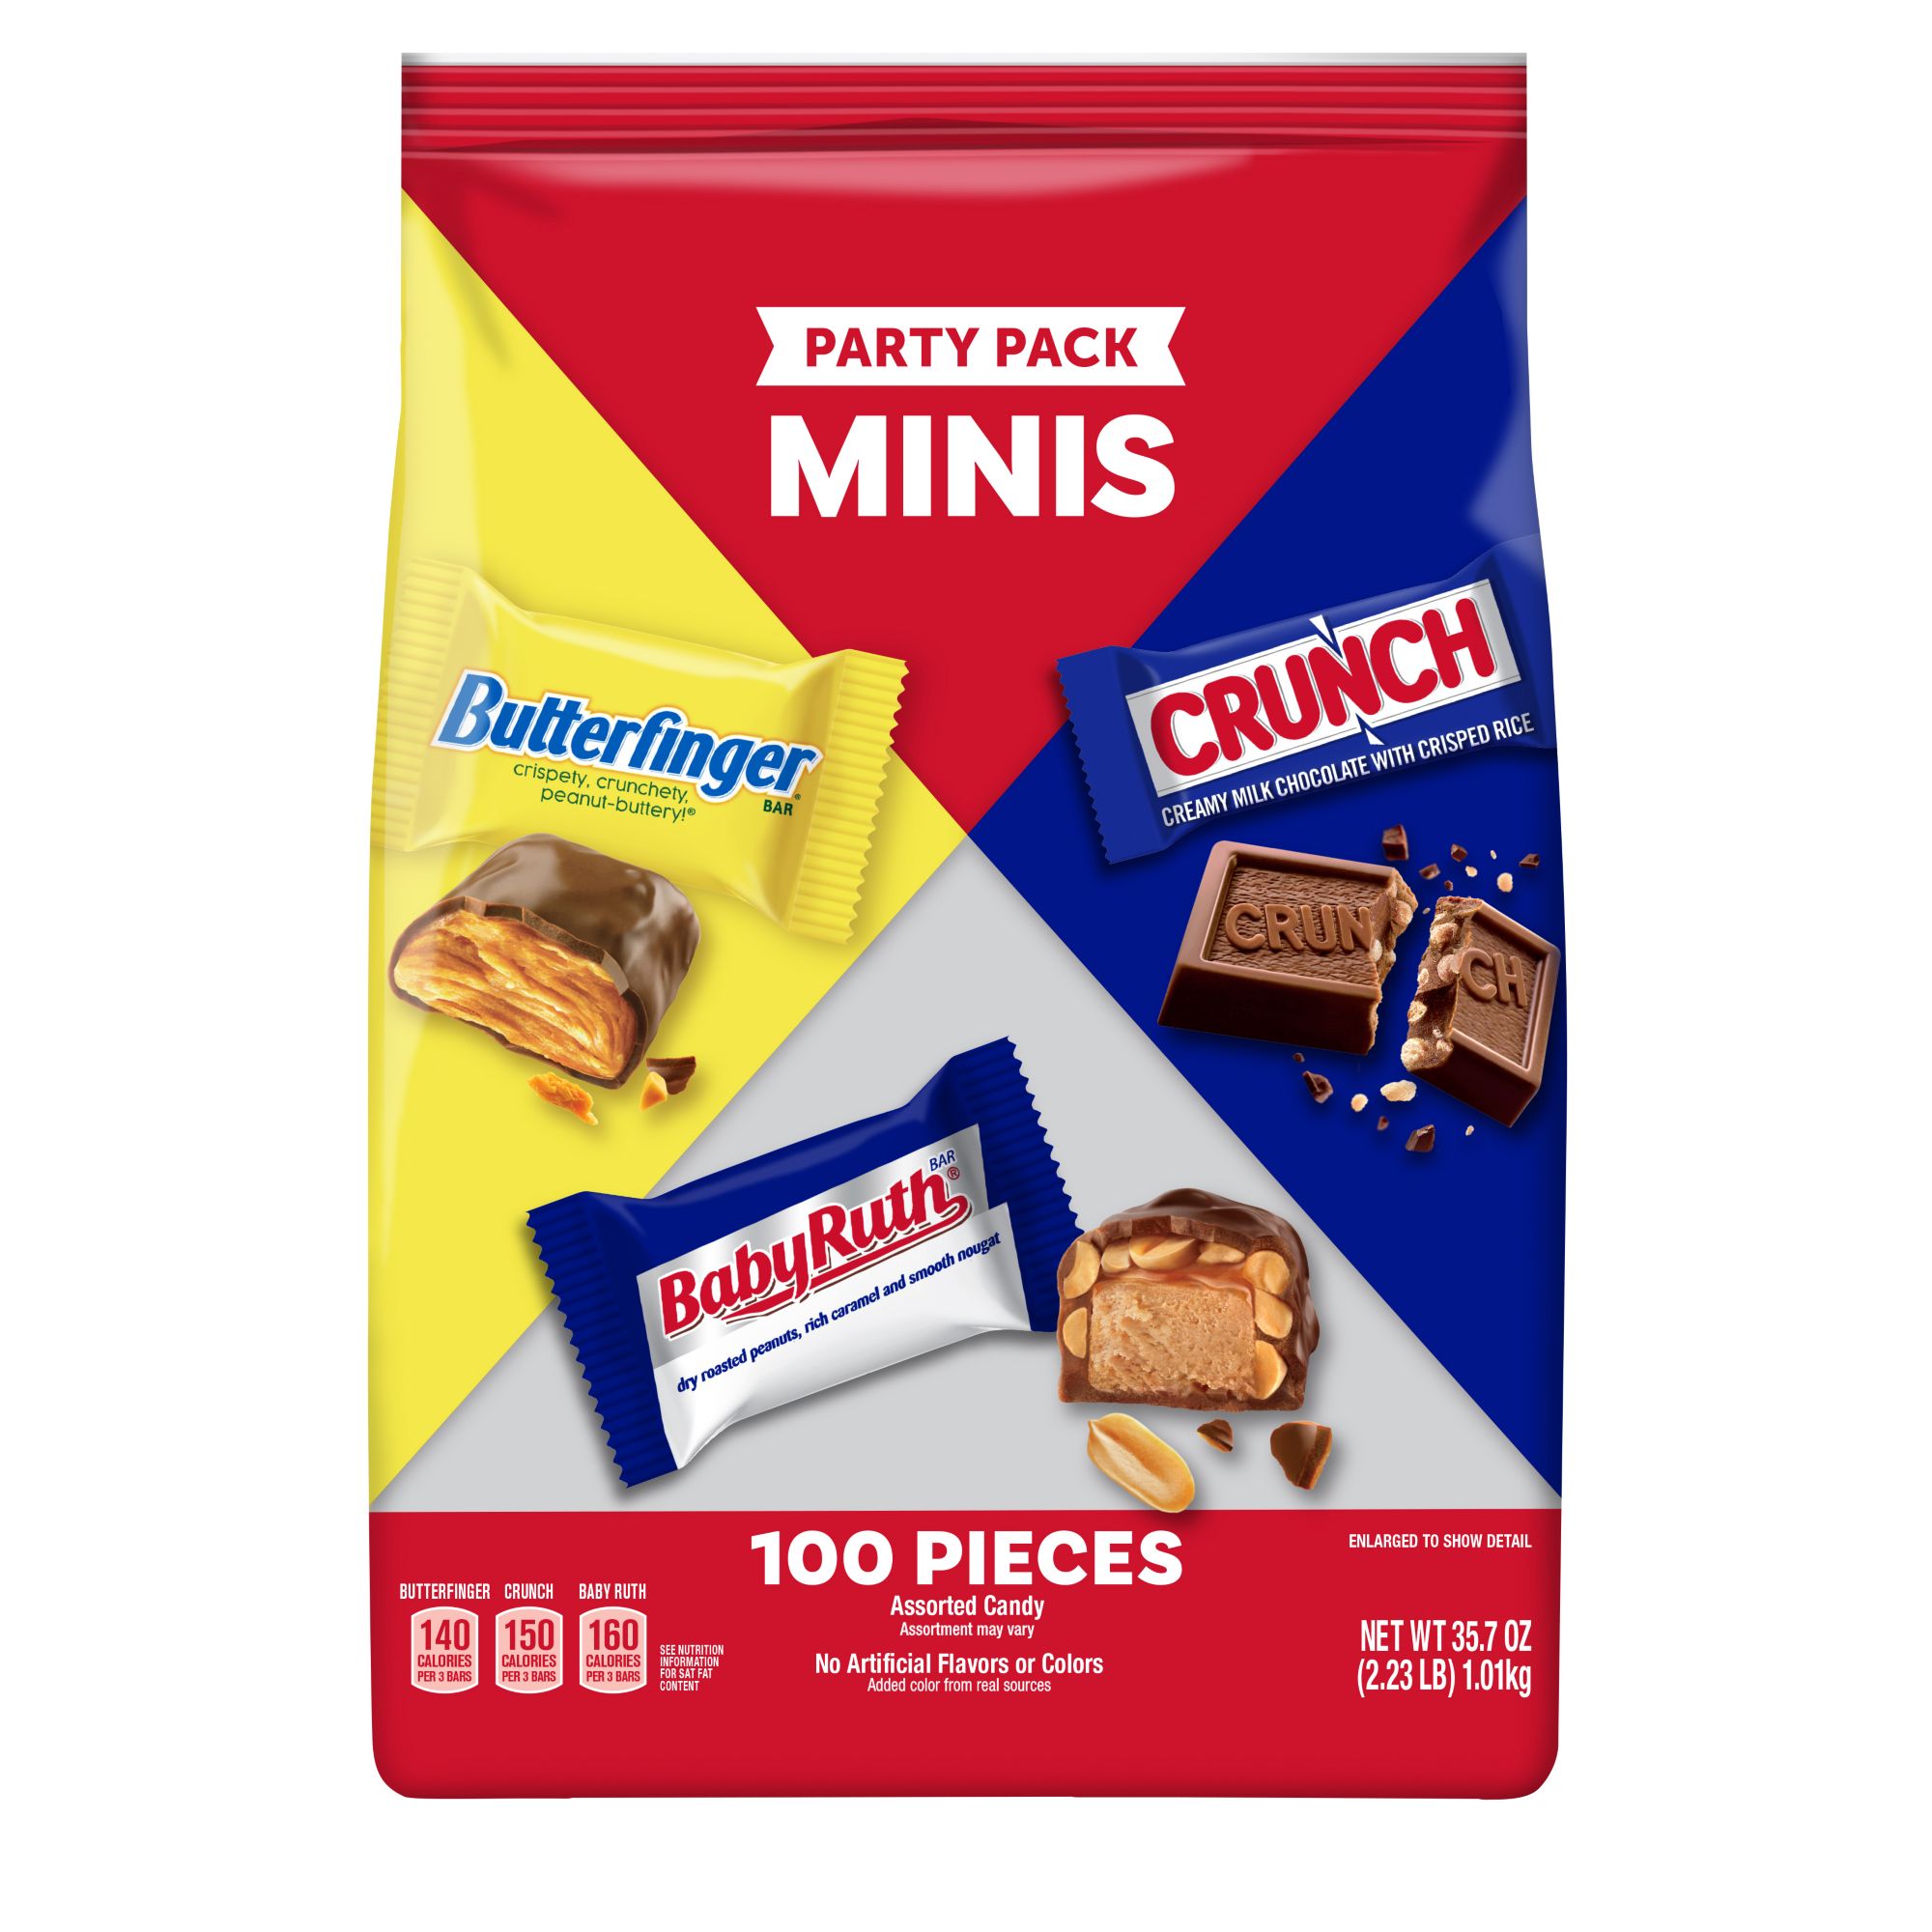 Assorted Chocolate Mini Bars - Variety Pack 3 Pounds